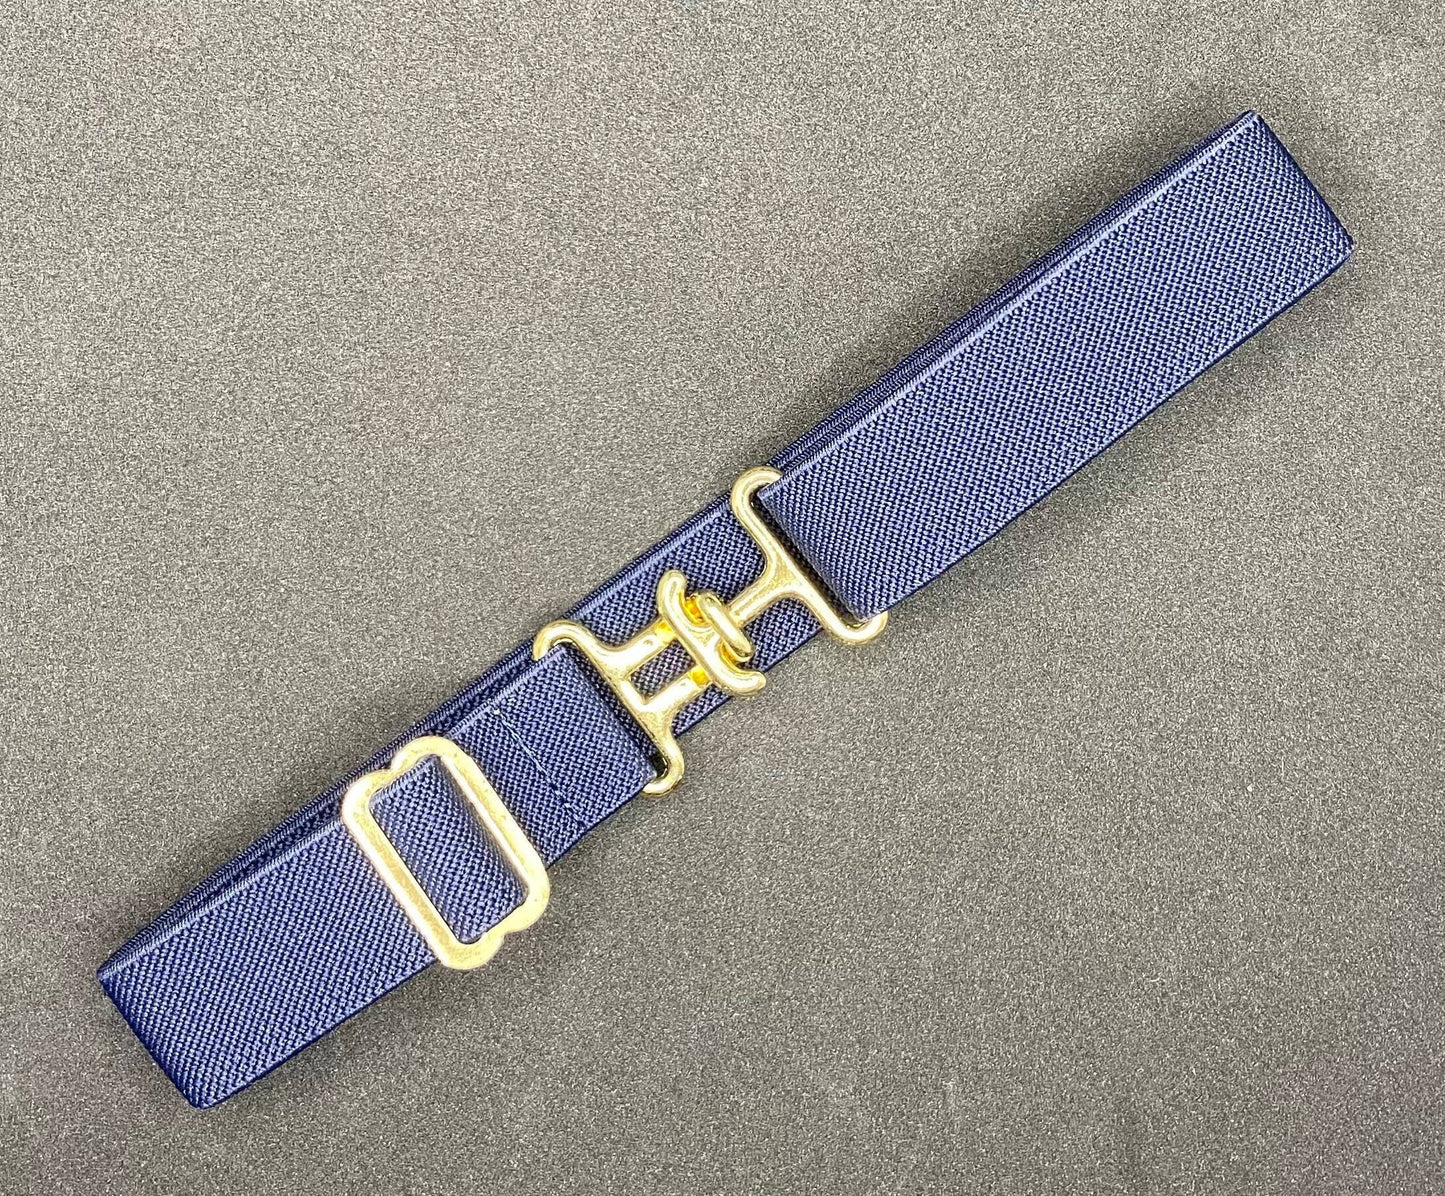 1" Equestrian Surcingle Belt - Navy with Gold Buckle